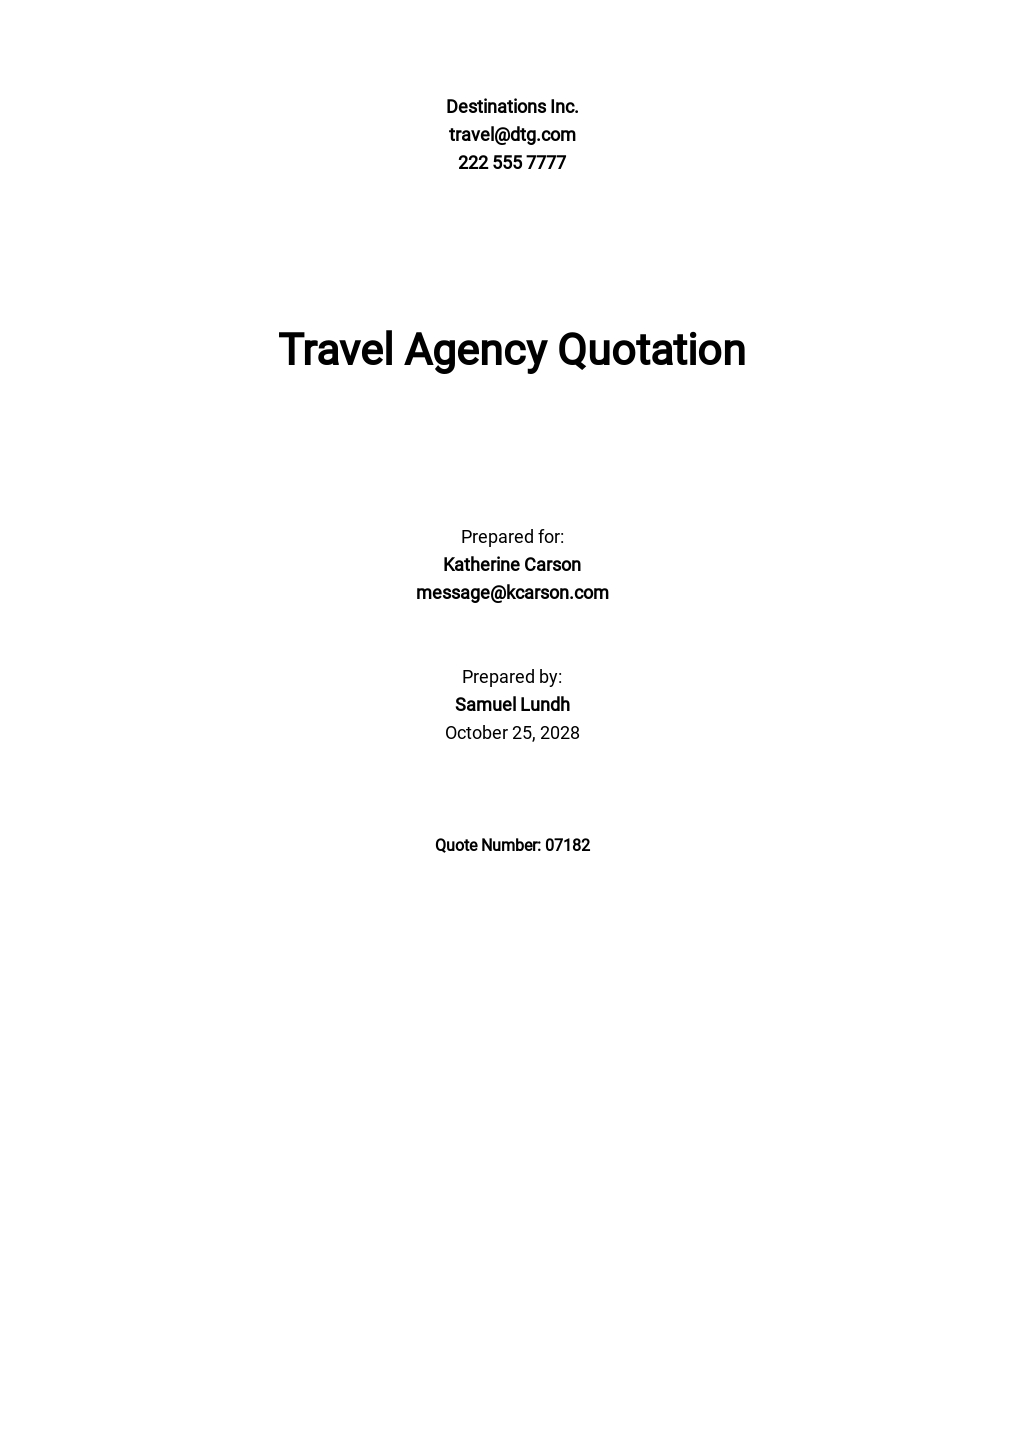 Travel Agency Quotation Template.jpe